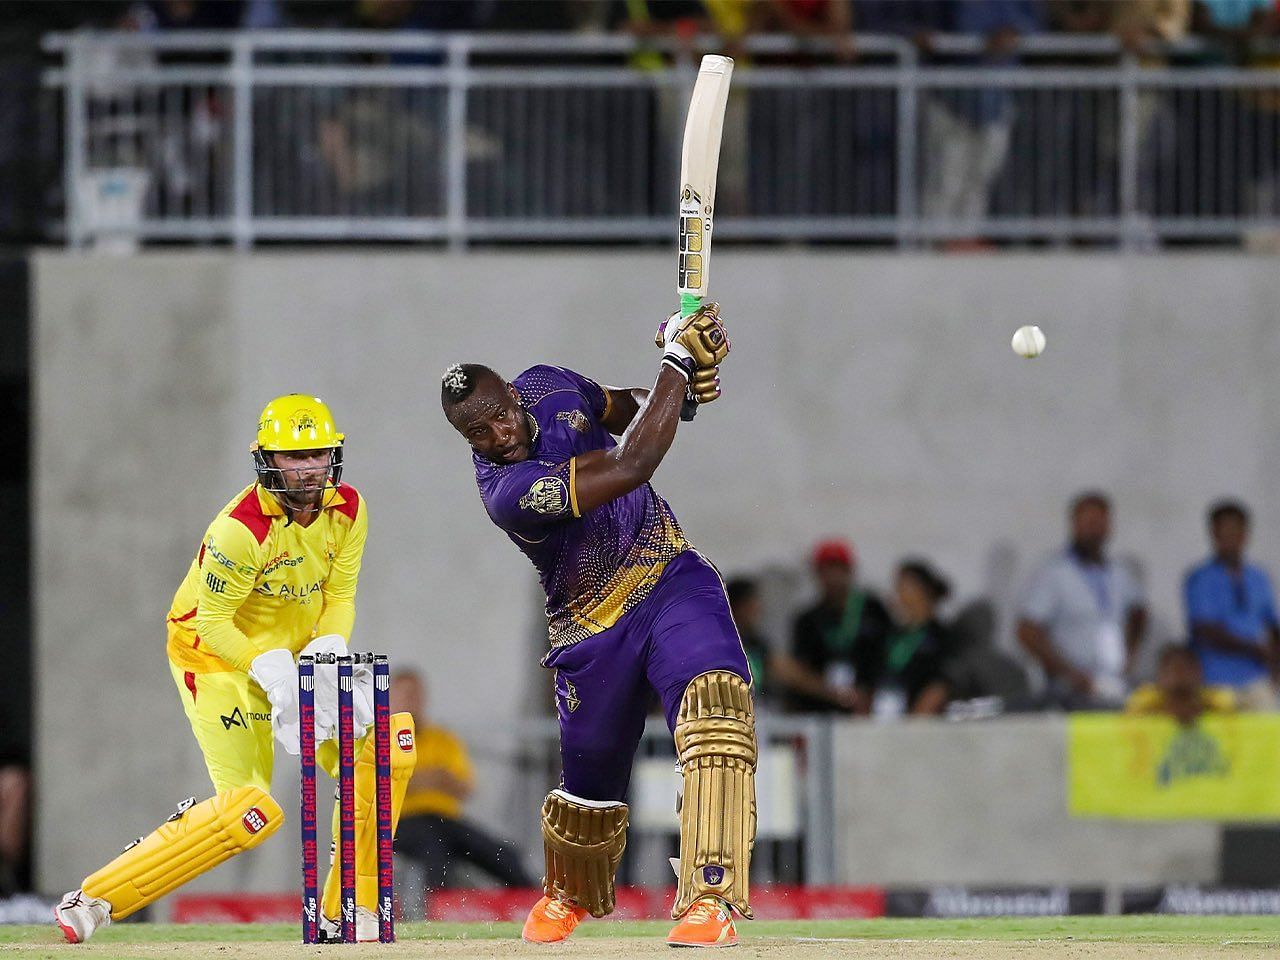 MLC 2023: Los Angeles Knight Riders vs MI New York, Match 6: Probable XIs, Match Prediction, Pitch Report, Weather Forecast, and Live Stream Details